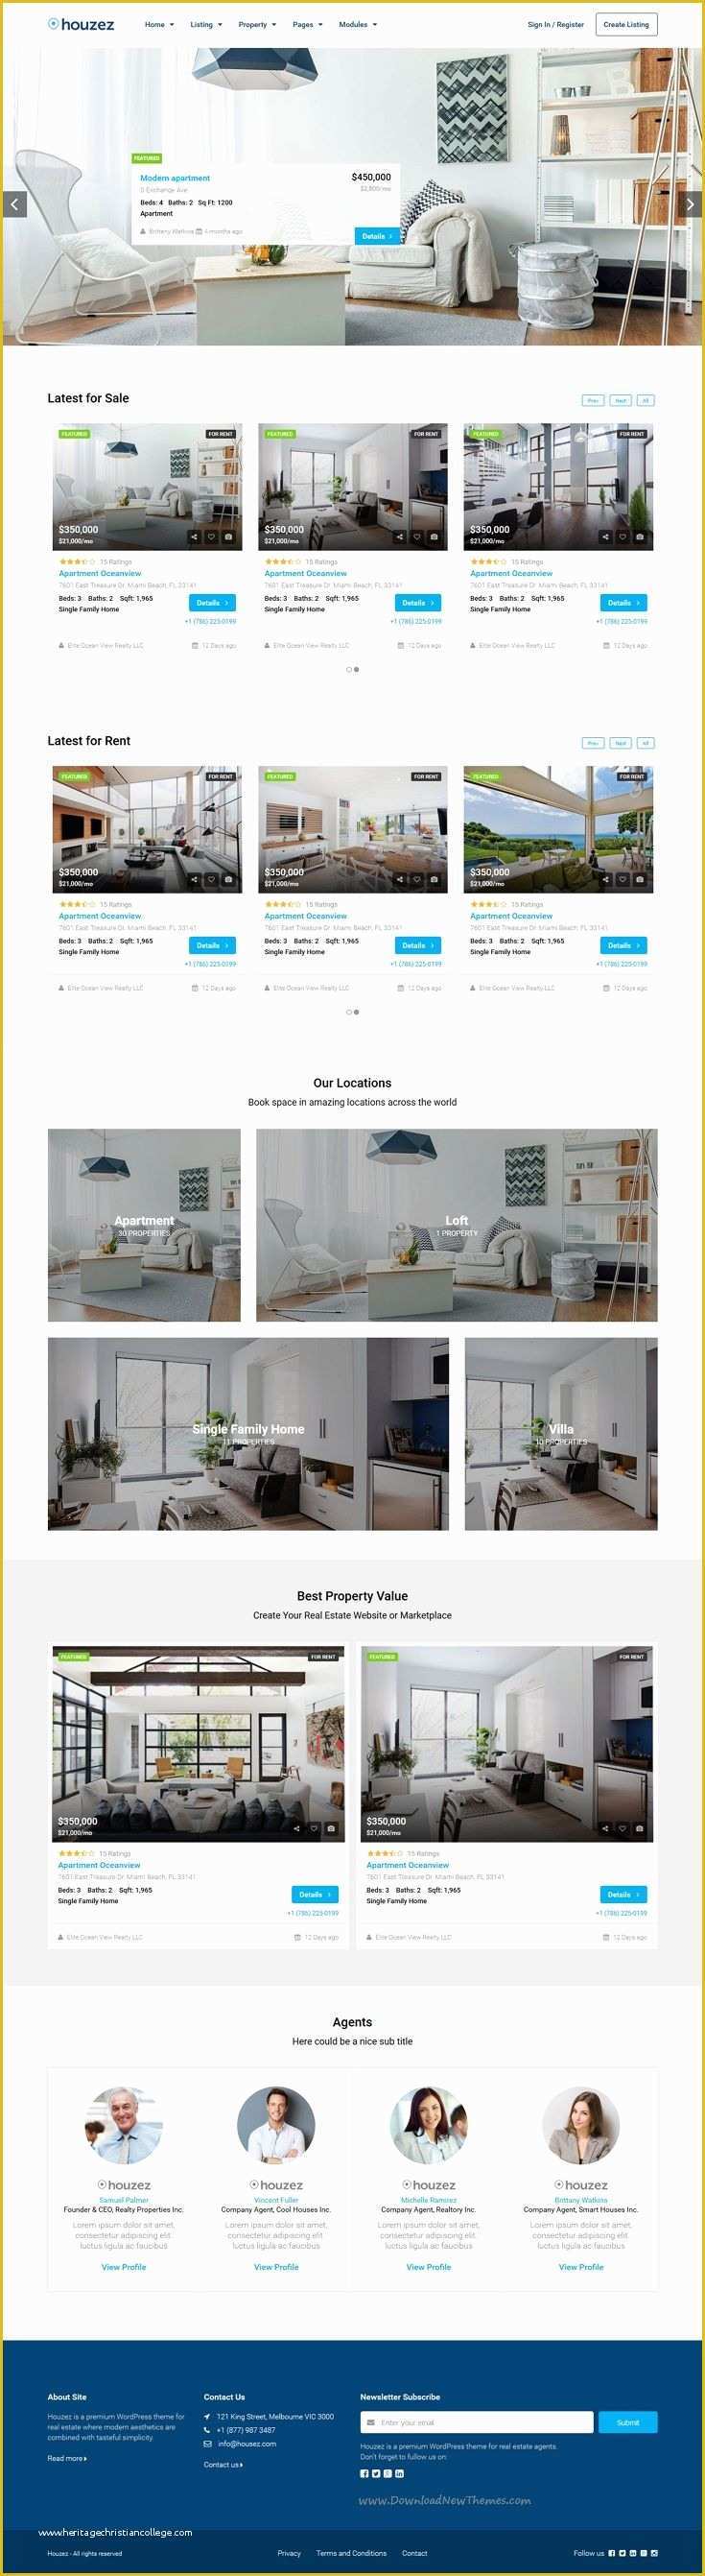 Real Estate Agent Website Templates Free Of 17 Best Ideas About Website Template On Pinterest